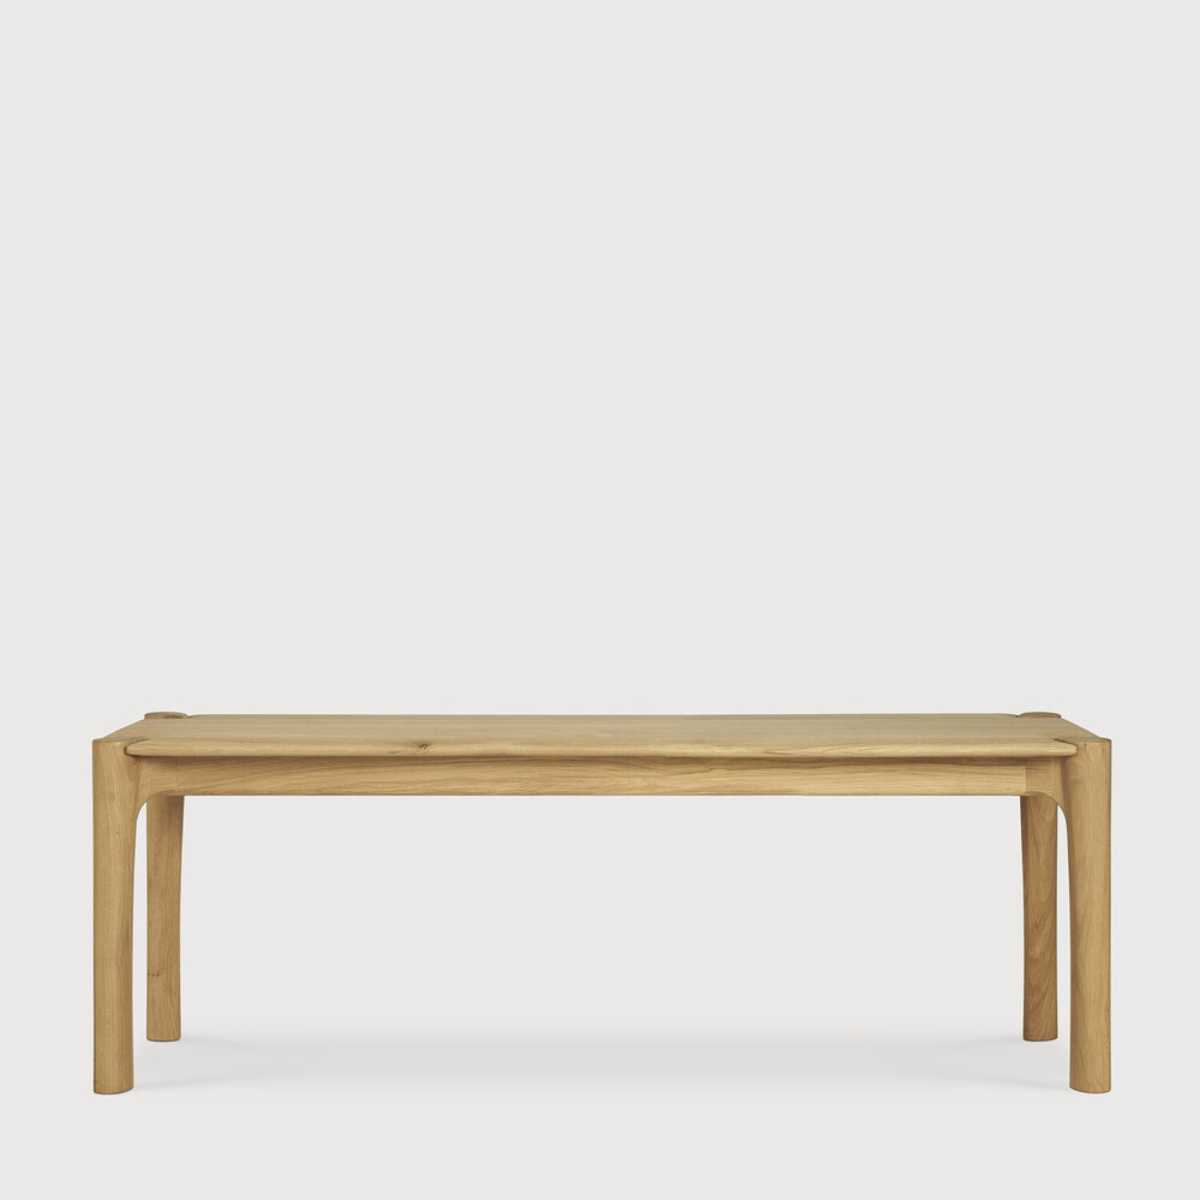 pi bench by ethnicraft on adorn.house